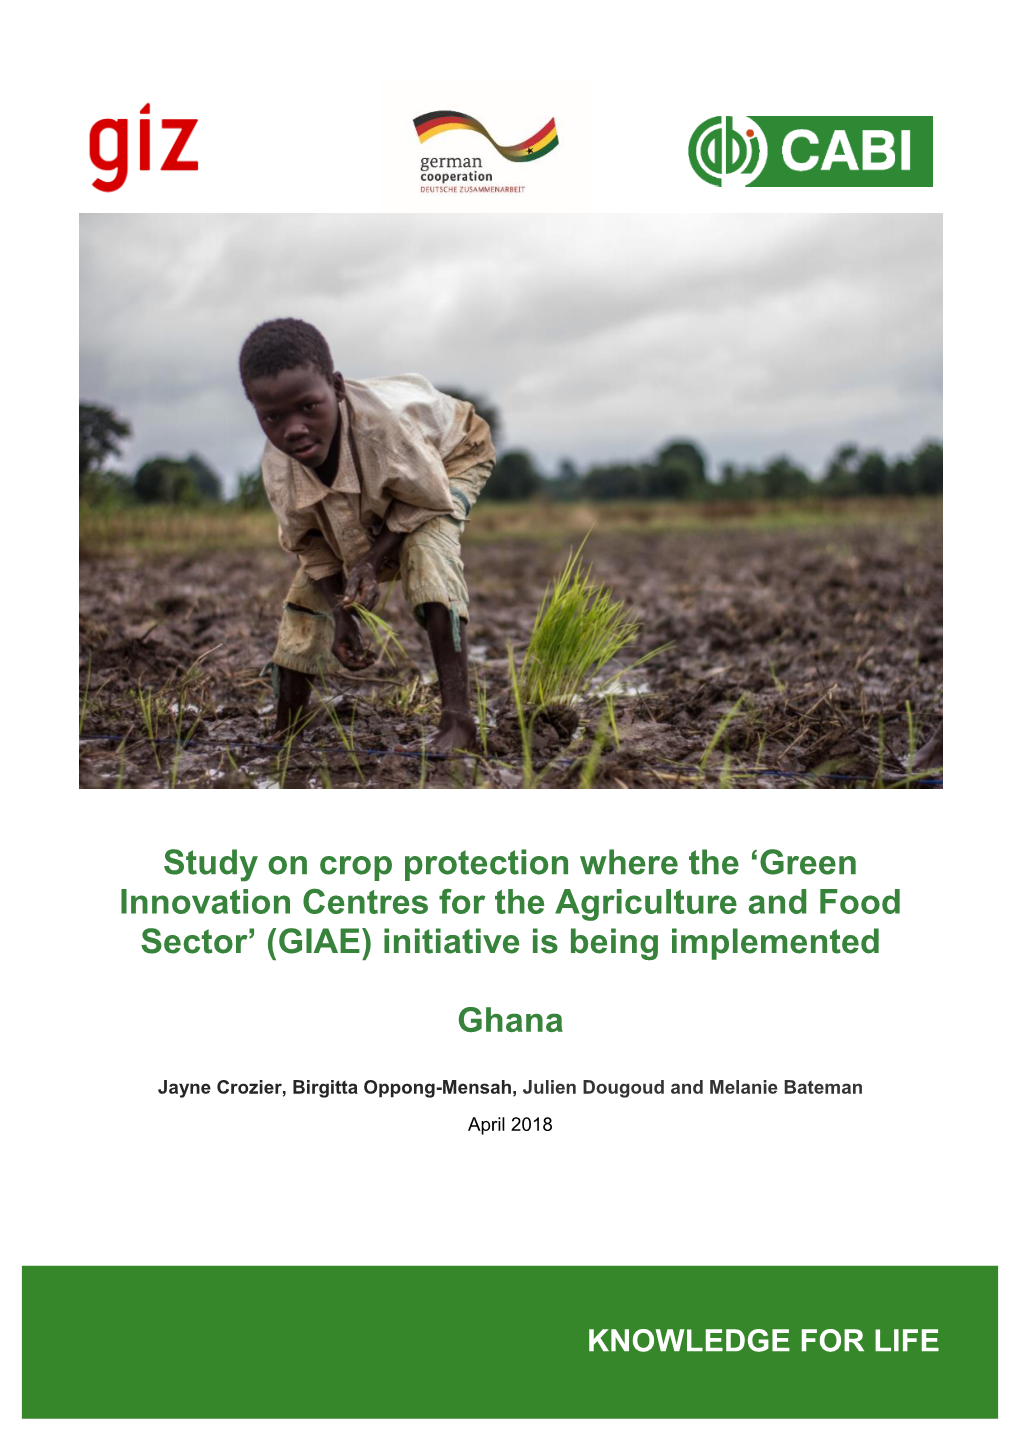 Study on Crop Protection Where the 'Green Innovation Centres for the Agriculture and Food Sector' (GIAE) Initiative Is Being